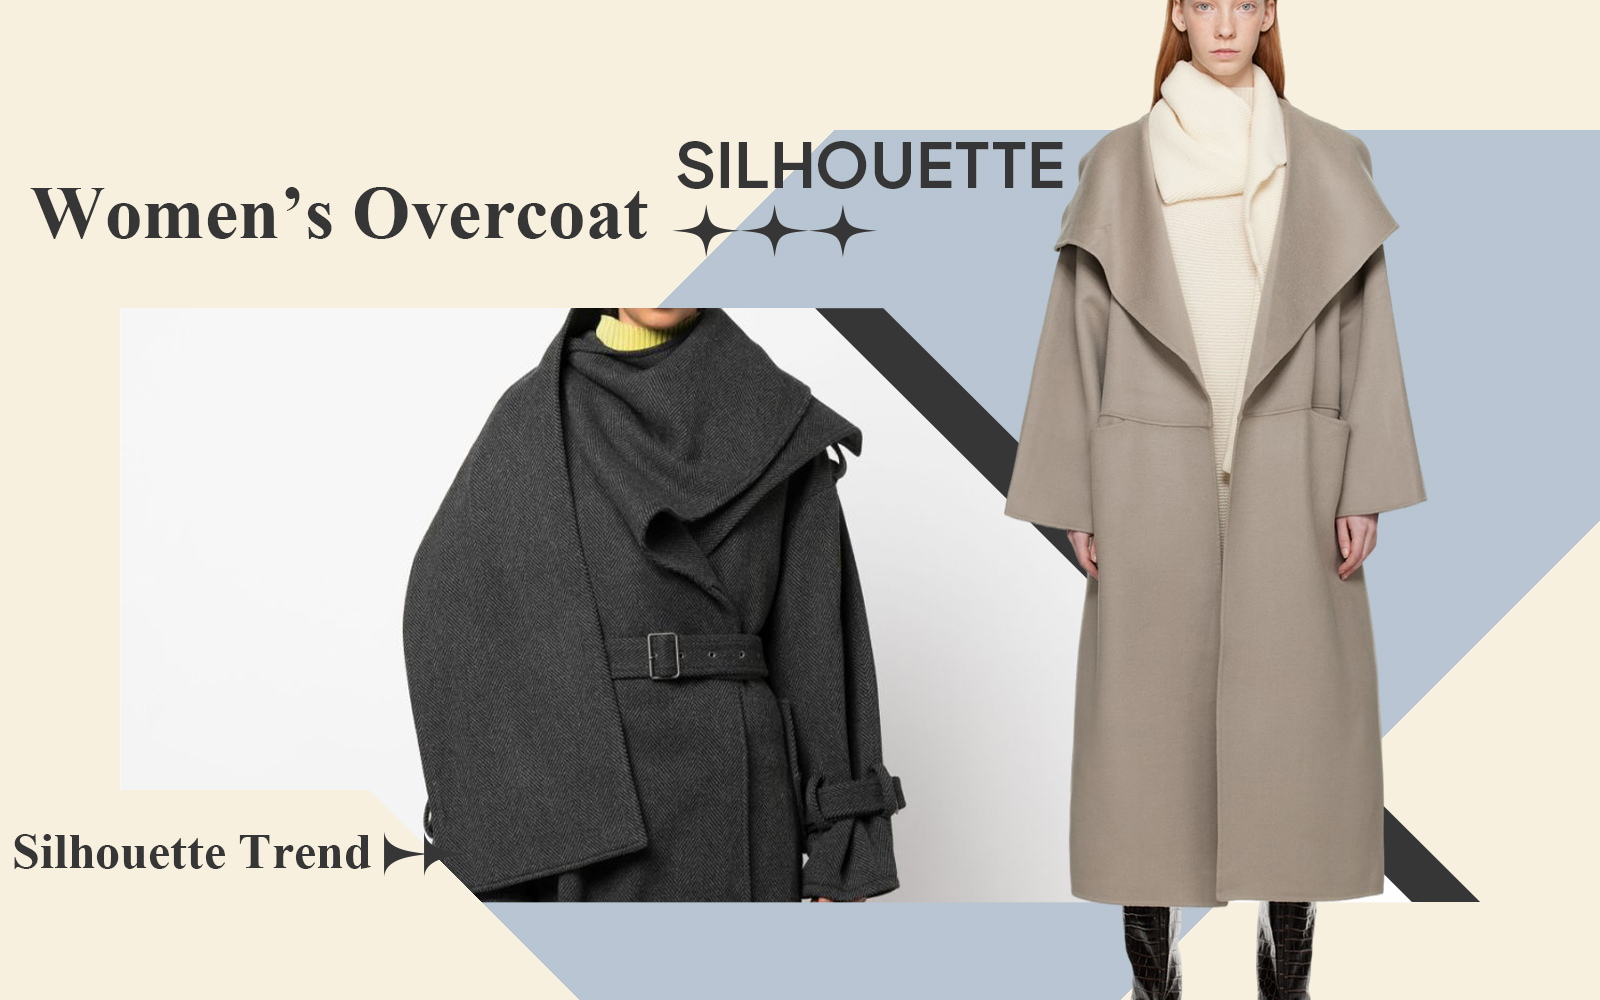 Warm & Cozy -- The Silhouette Trend for Women's Overcoat